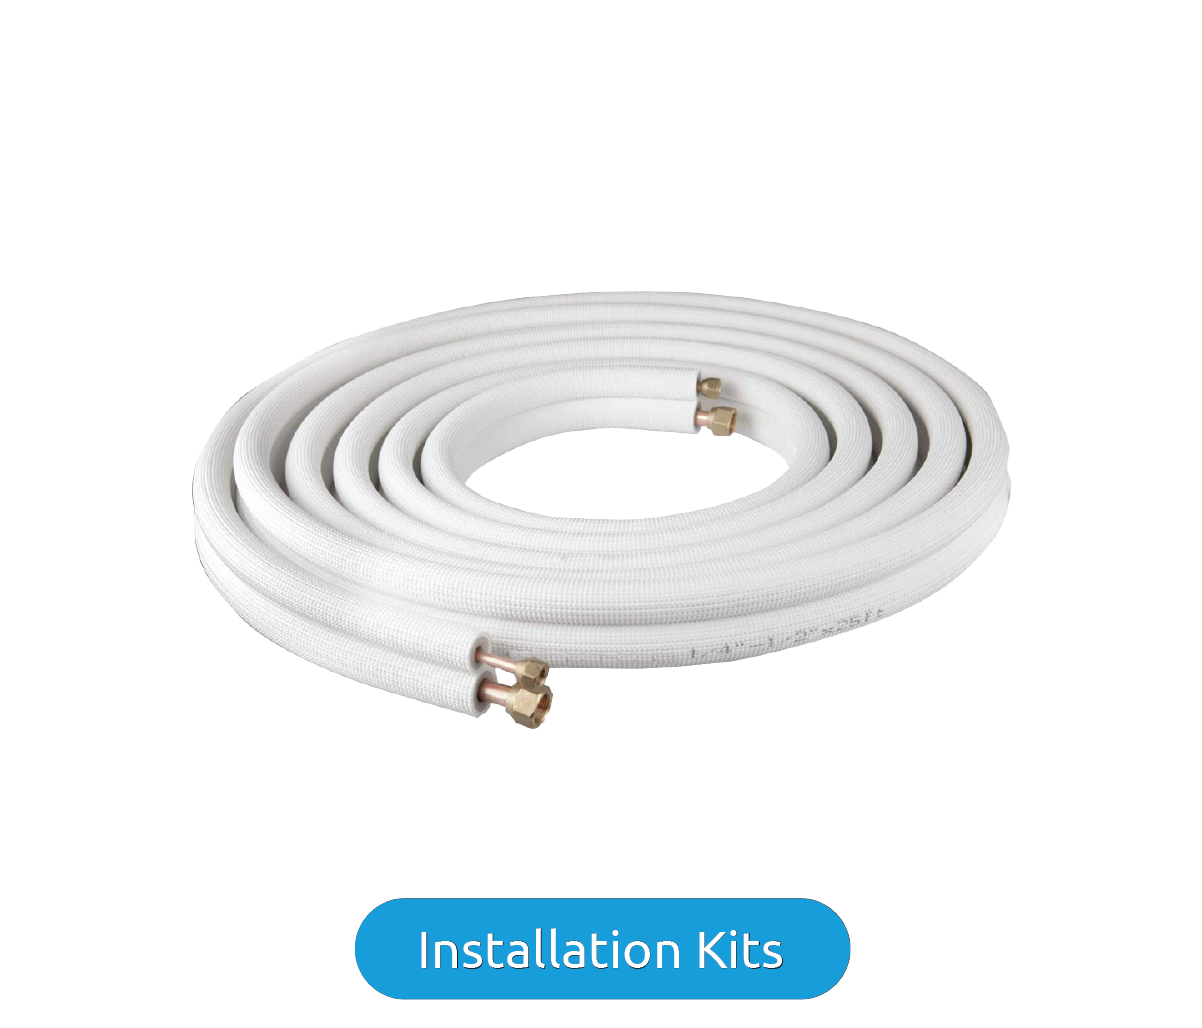 Air-Con 25 Foot Line Set with 3/8" Insulation - OT-1309-INSKIT